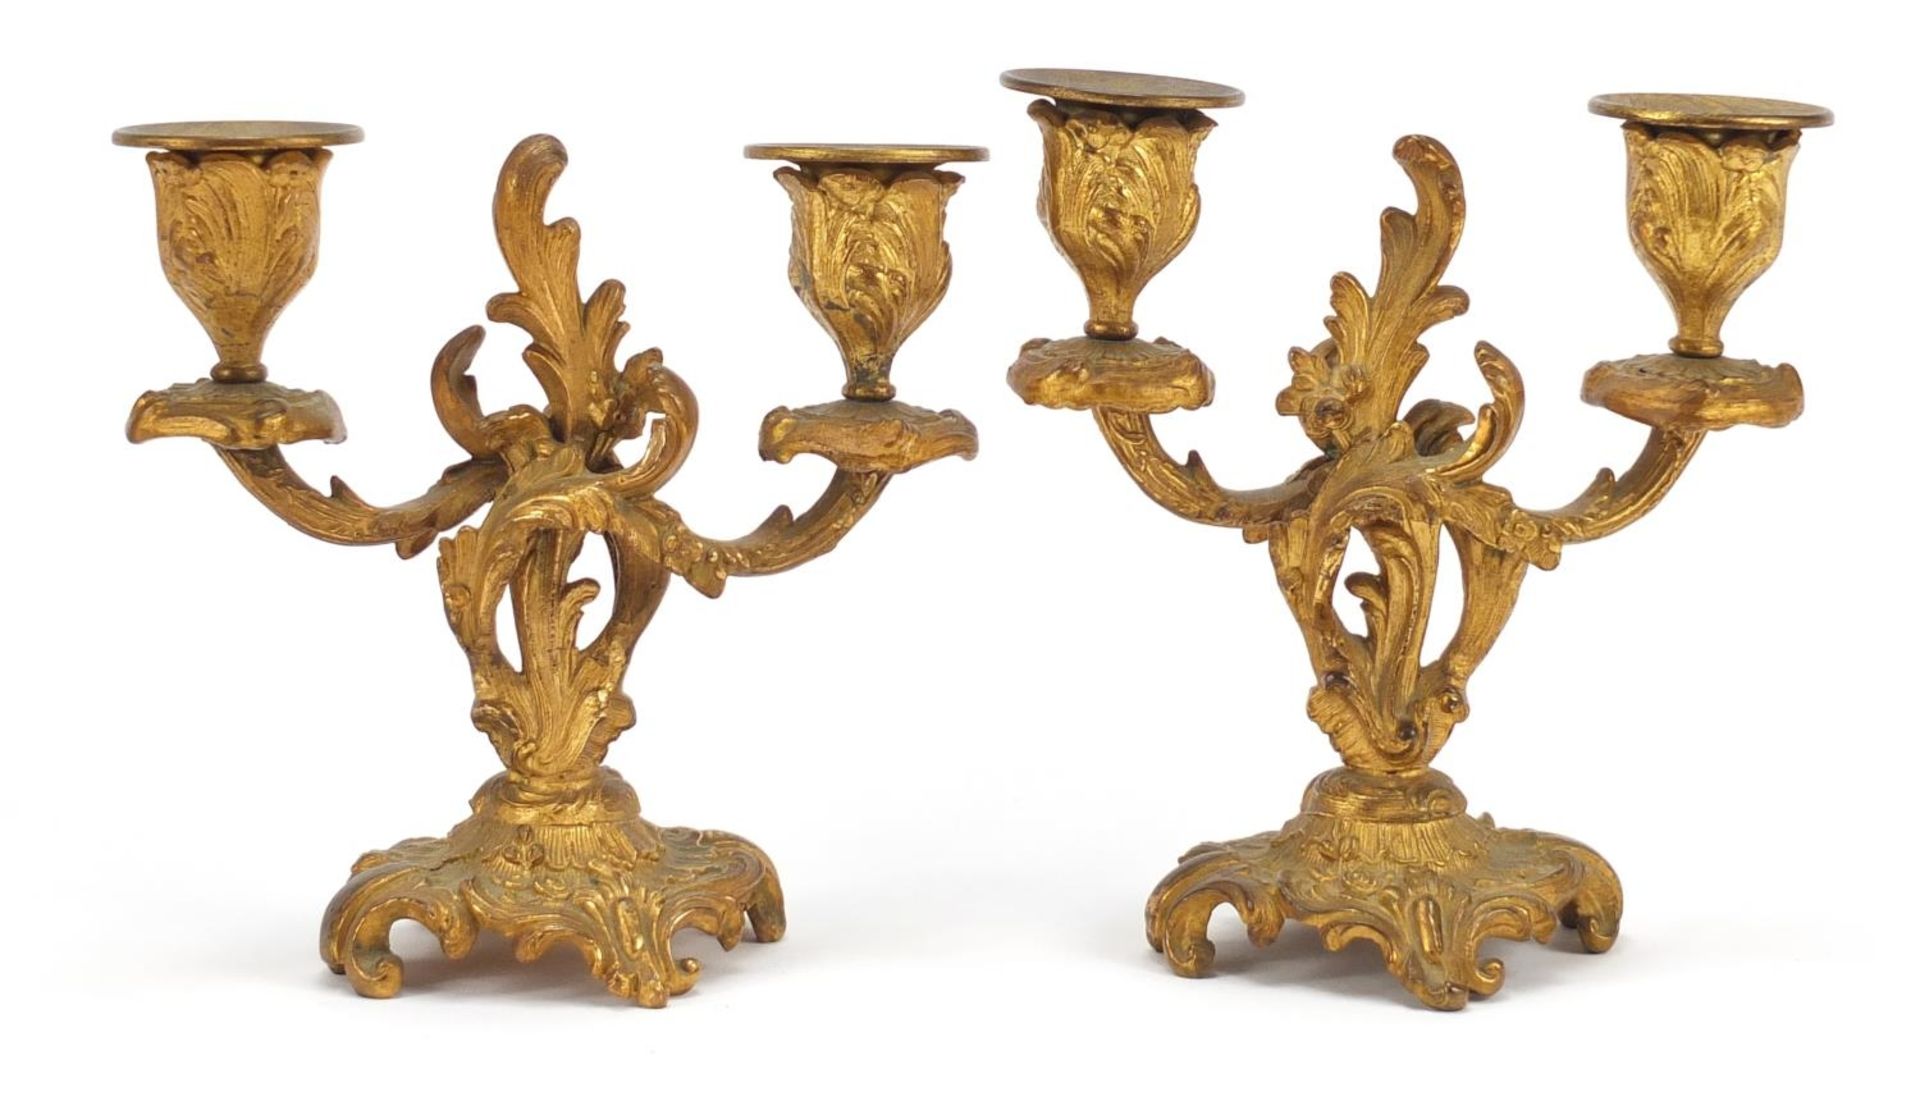 Pair of Rococco style gilt metal two branch candlesticks, each 15cm high Both are in generally